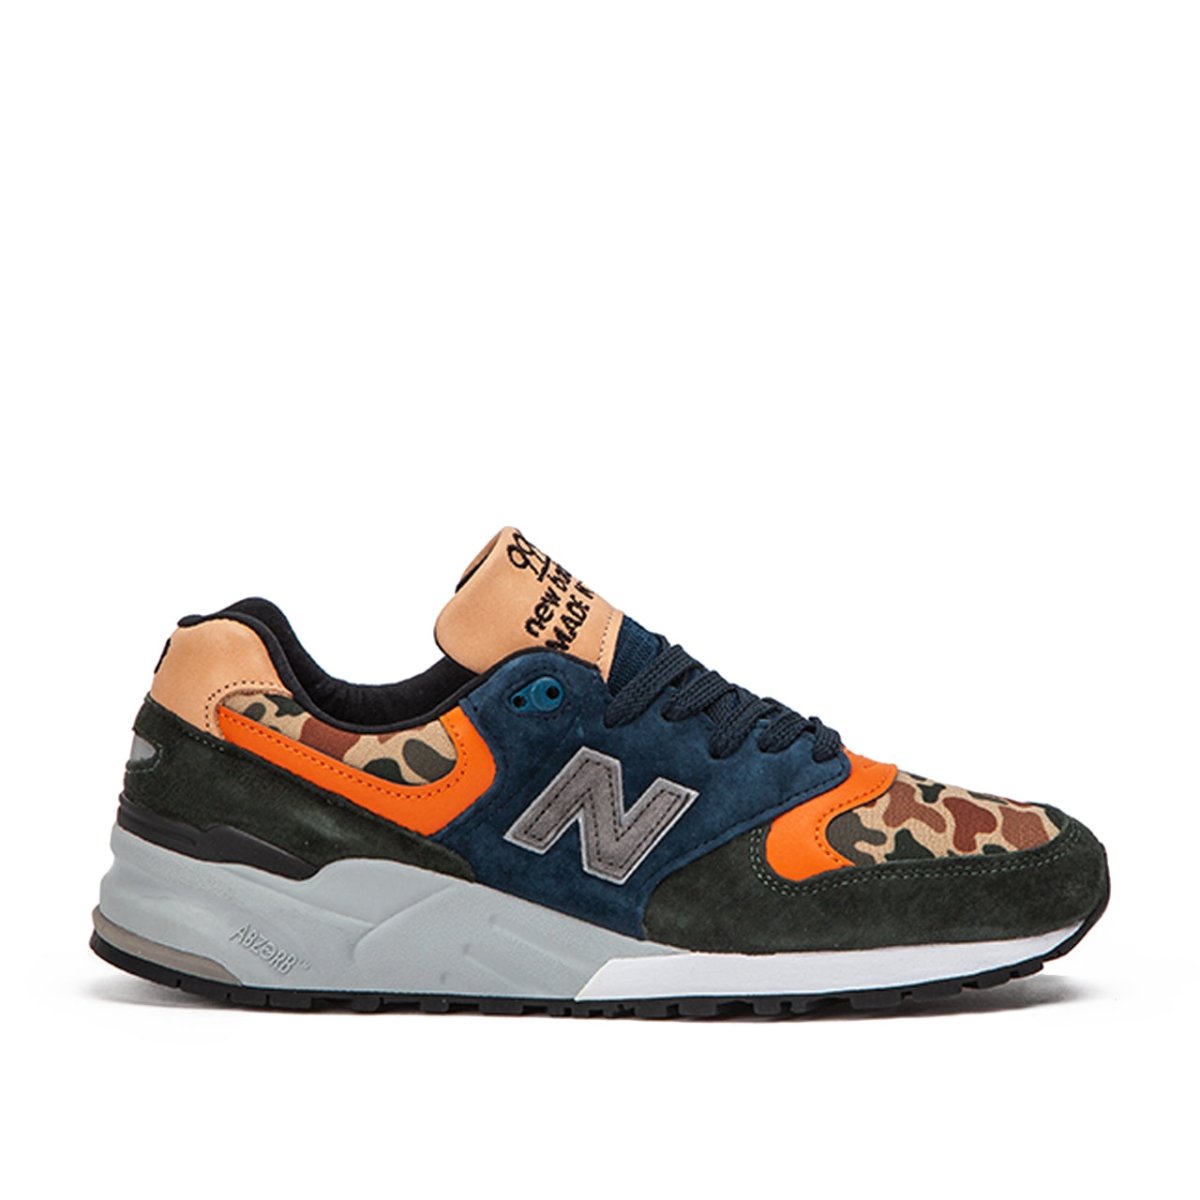 New Balance M 999 NI 'Made in USA' / Blue) 663911-60-5 – Store